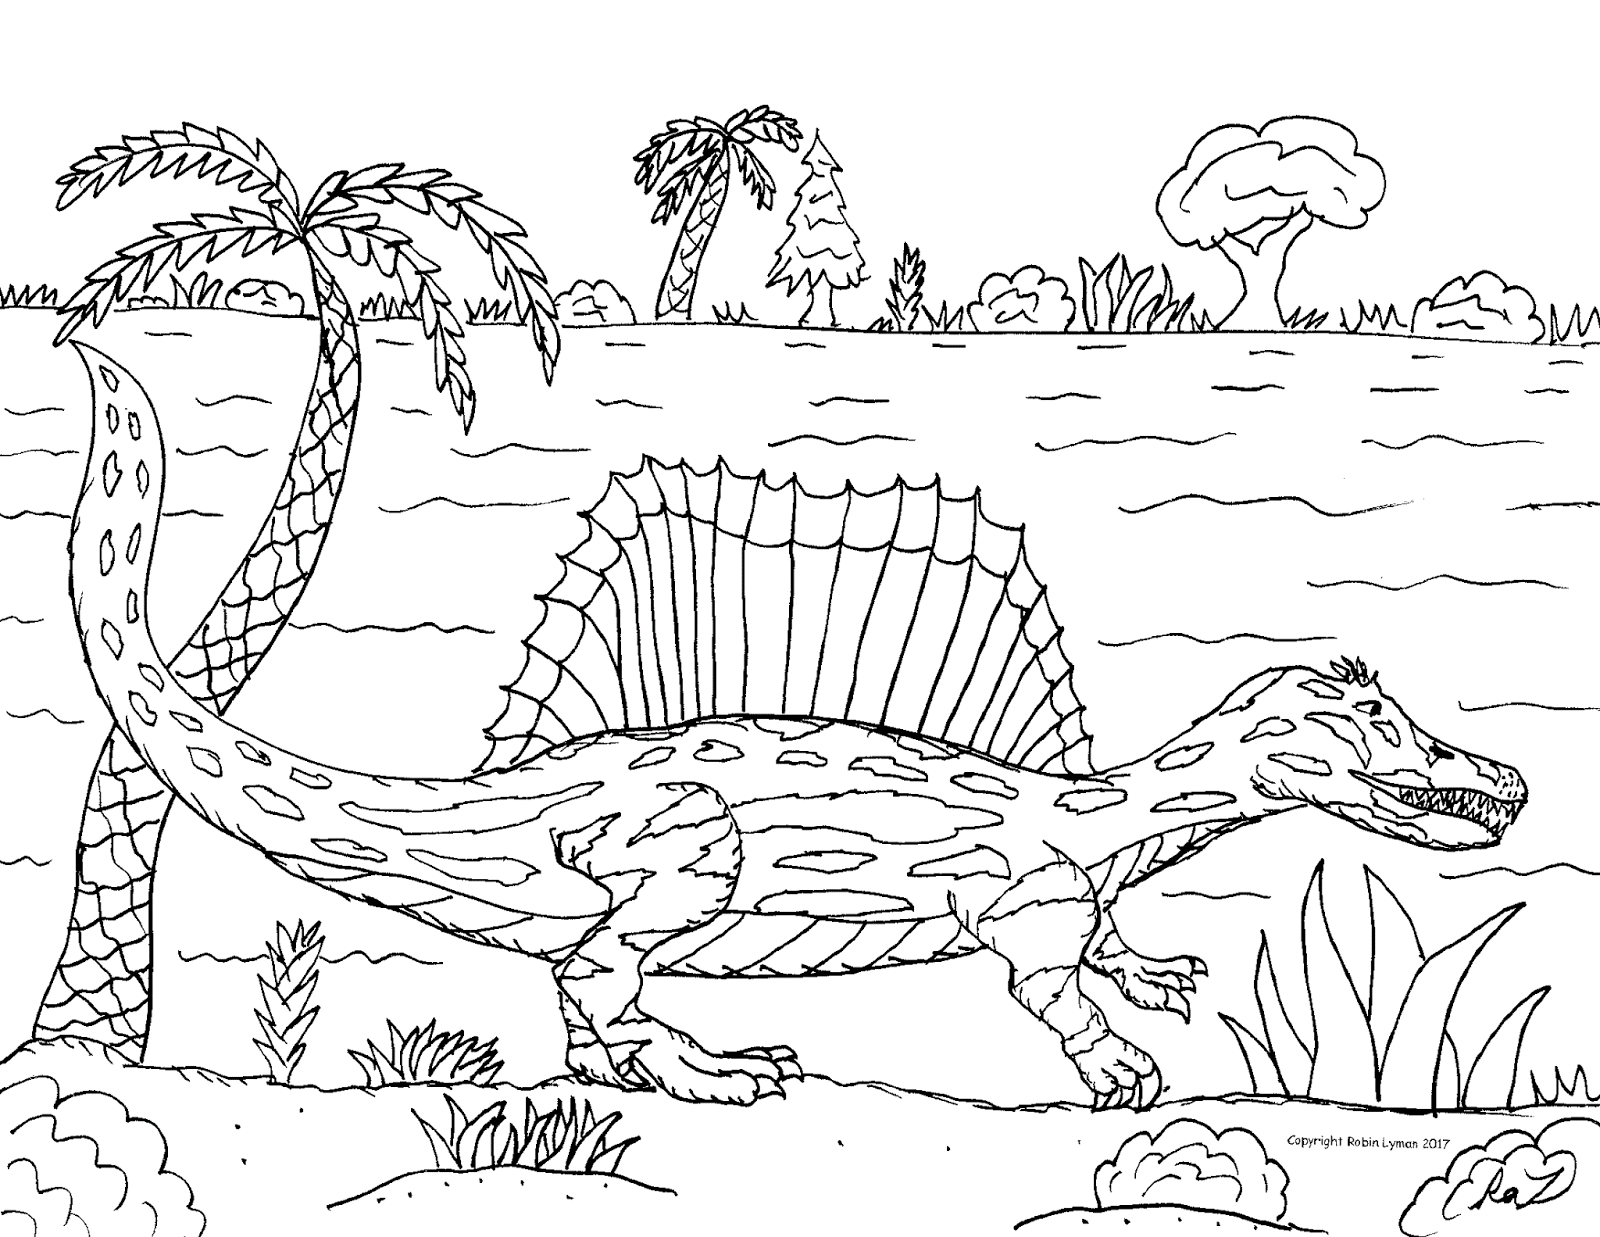 Robin'S Great Coloring Pages: Spinosaurus The Biggest Killer Dinosaur à Coloriage Spinosaurus